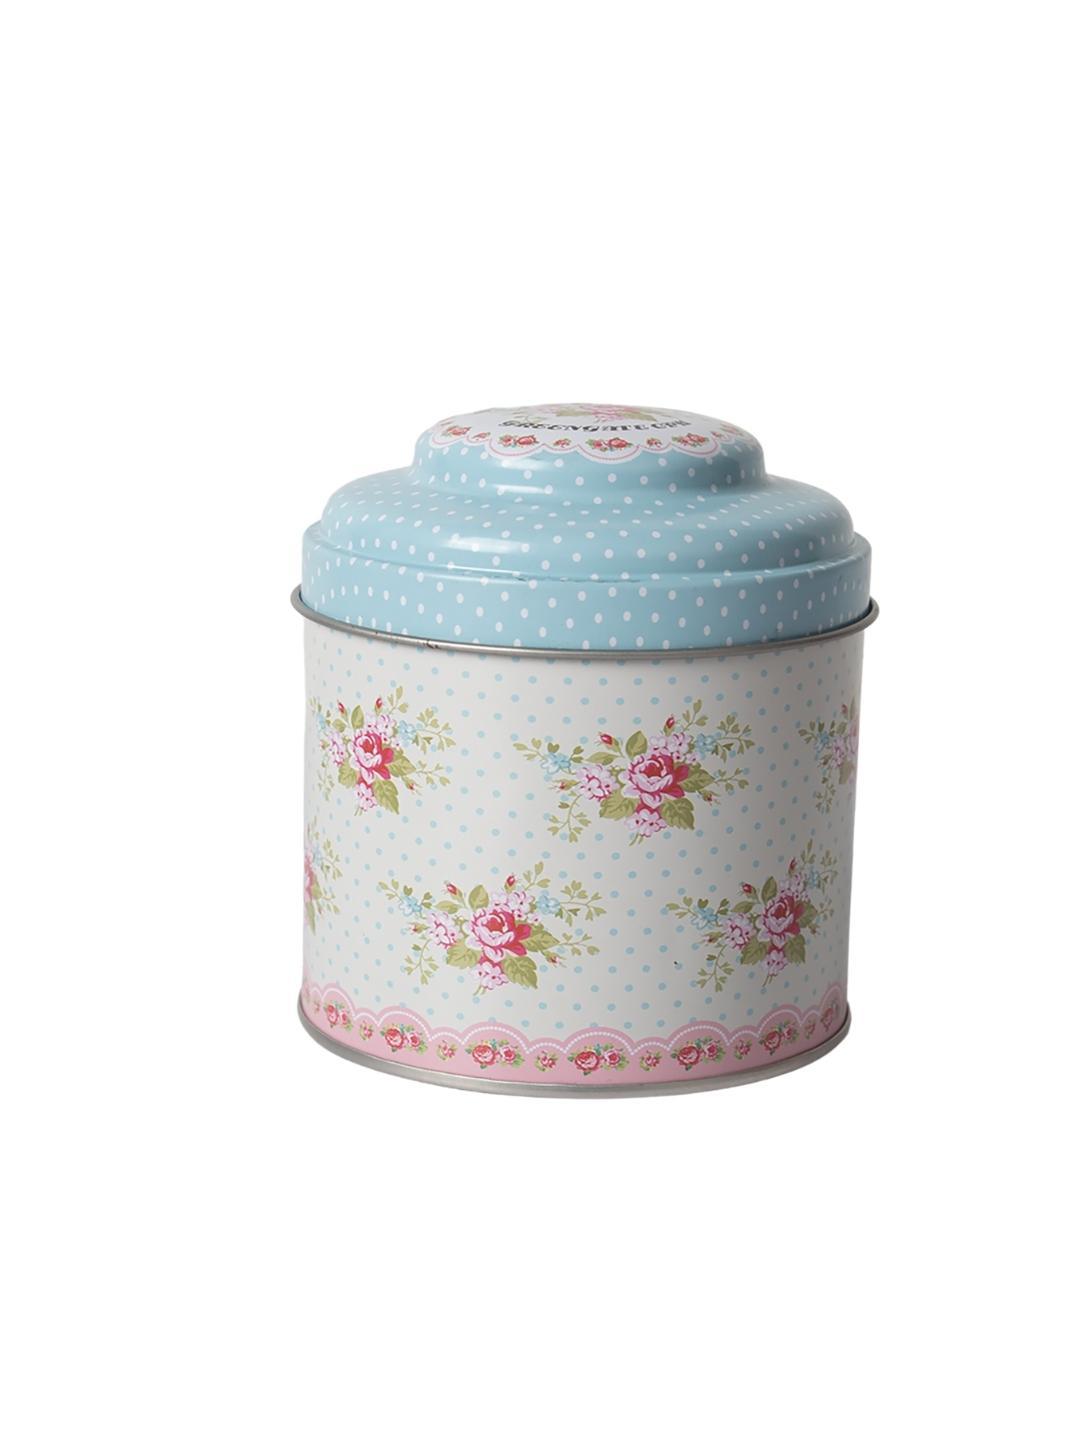 Floral Tin Storage Canister with Lid - Baby Blue